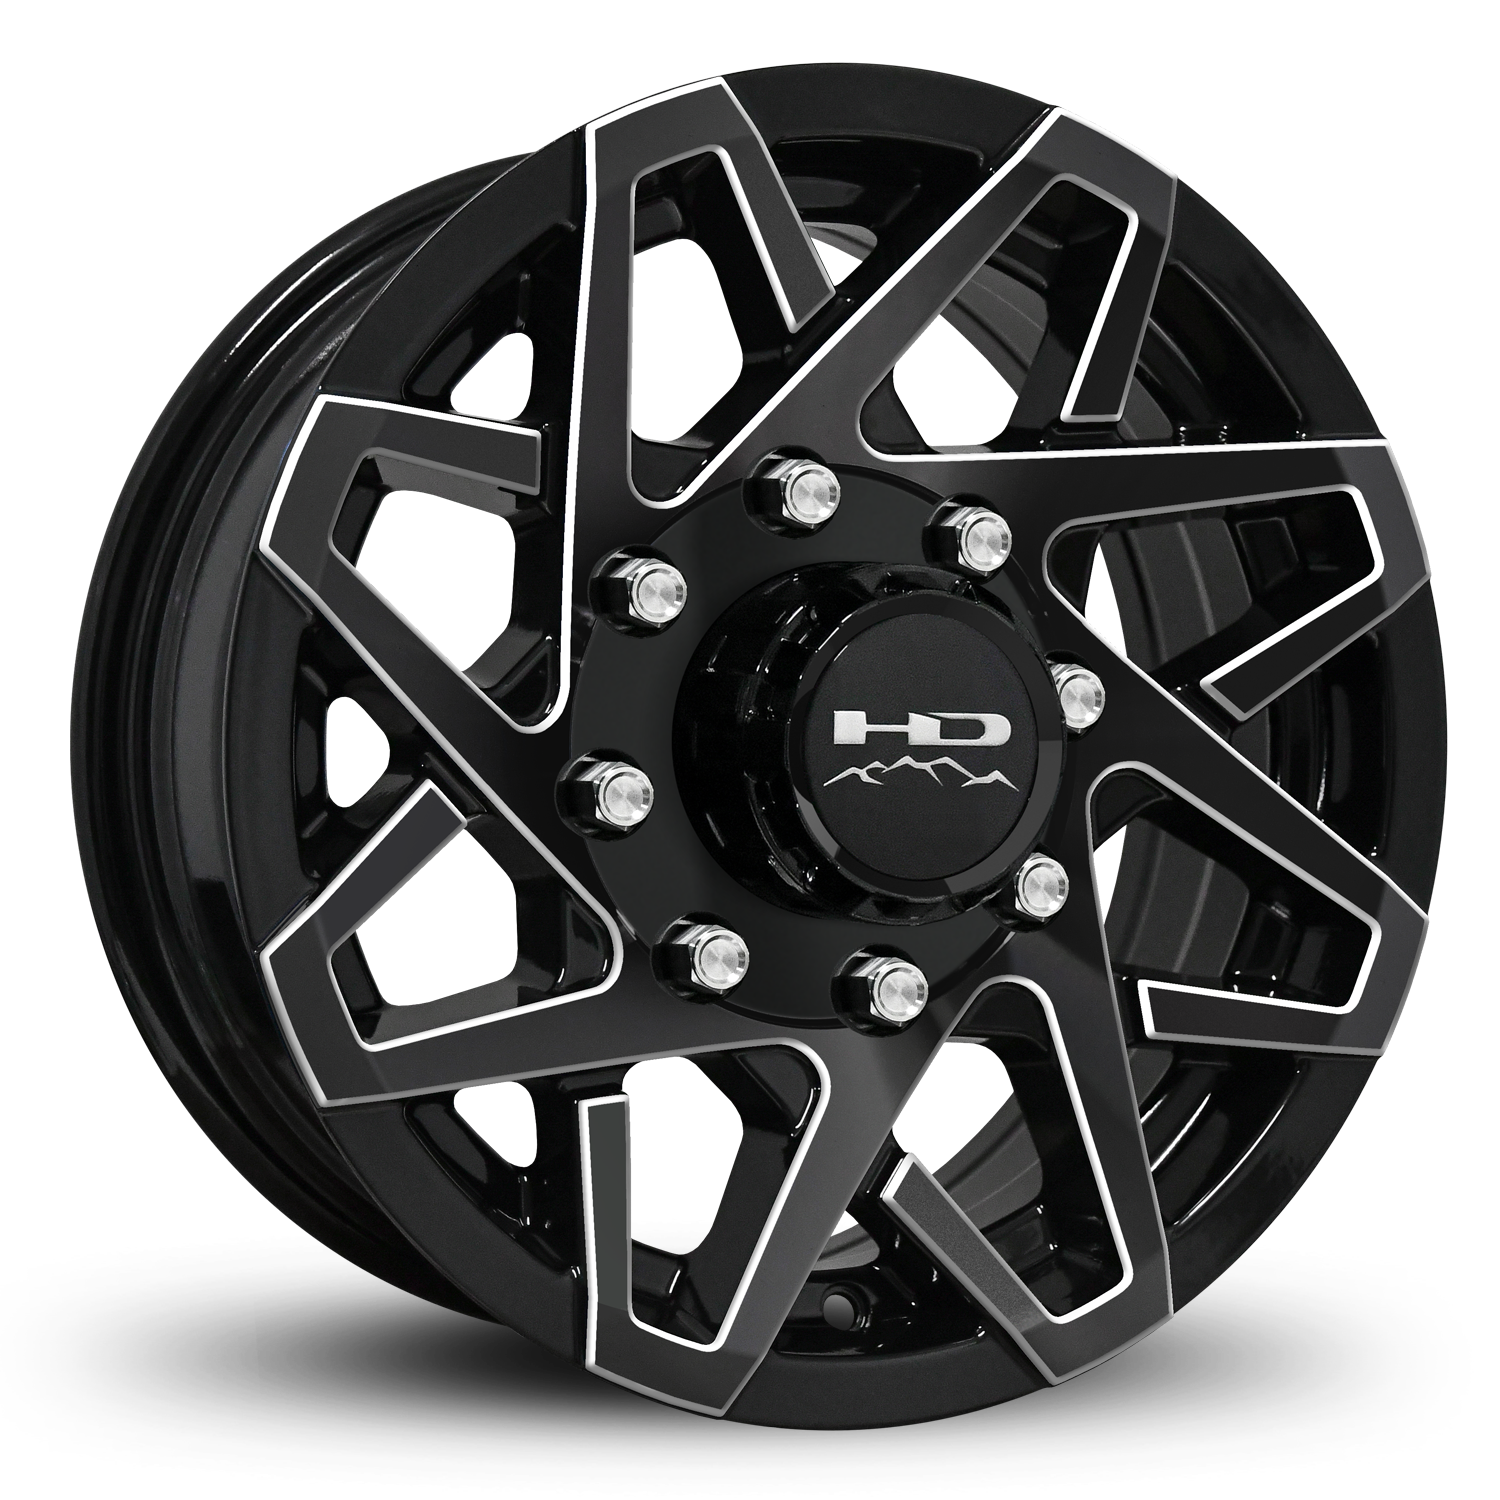 HD Off-Road Canyon Custom Trailer Wheel Rims in 16x6.0 16x6 Gloss Black CNC Milled Spoke Edges with Center Cap & Logo fits 8x165 / 8x6.50 Axle Boat, Car, RV, Travel, Concession, Horse, Utility, Lawn & Garden, & Landscaping.